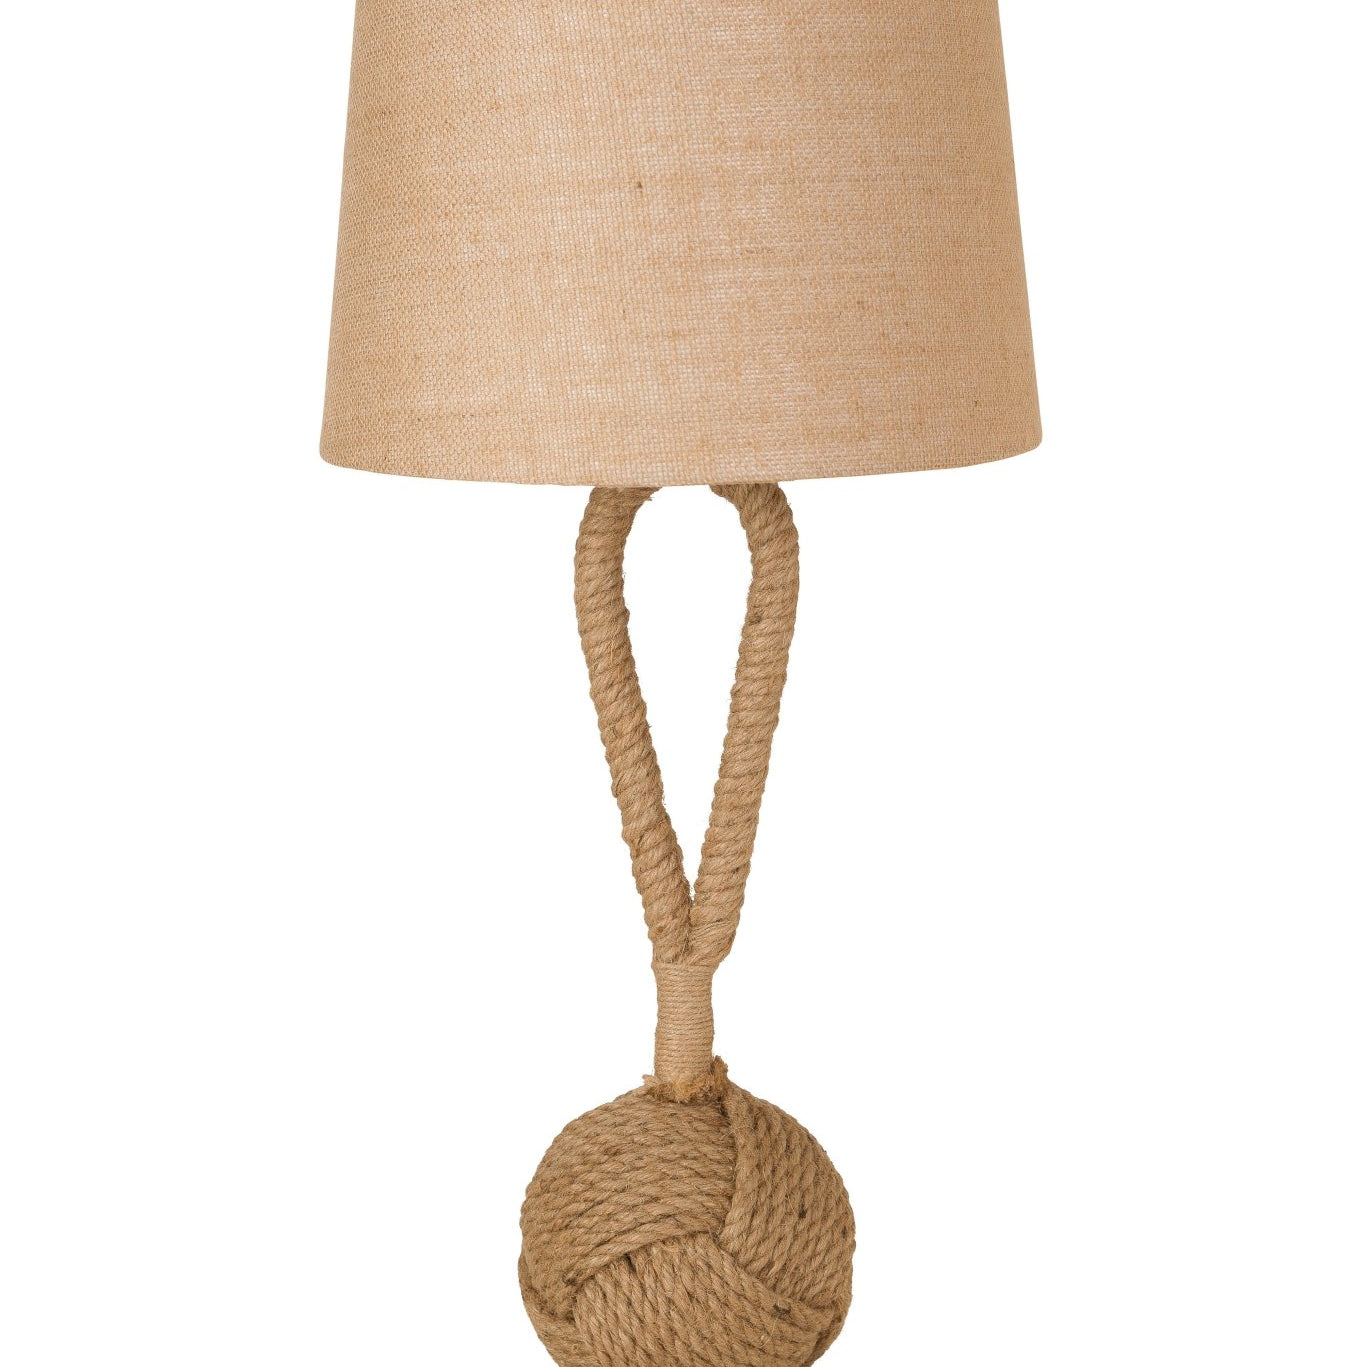 Rope 29" Table Lamp, Natural color, (Set of 2) - Table Lamps